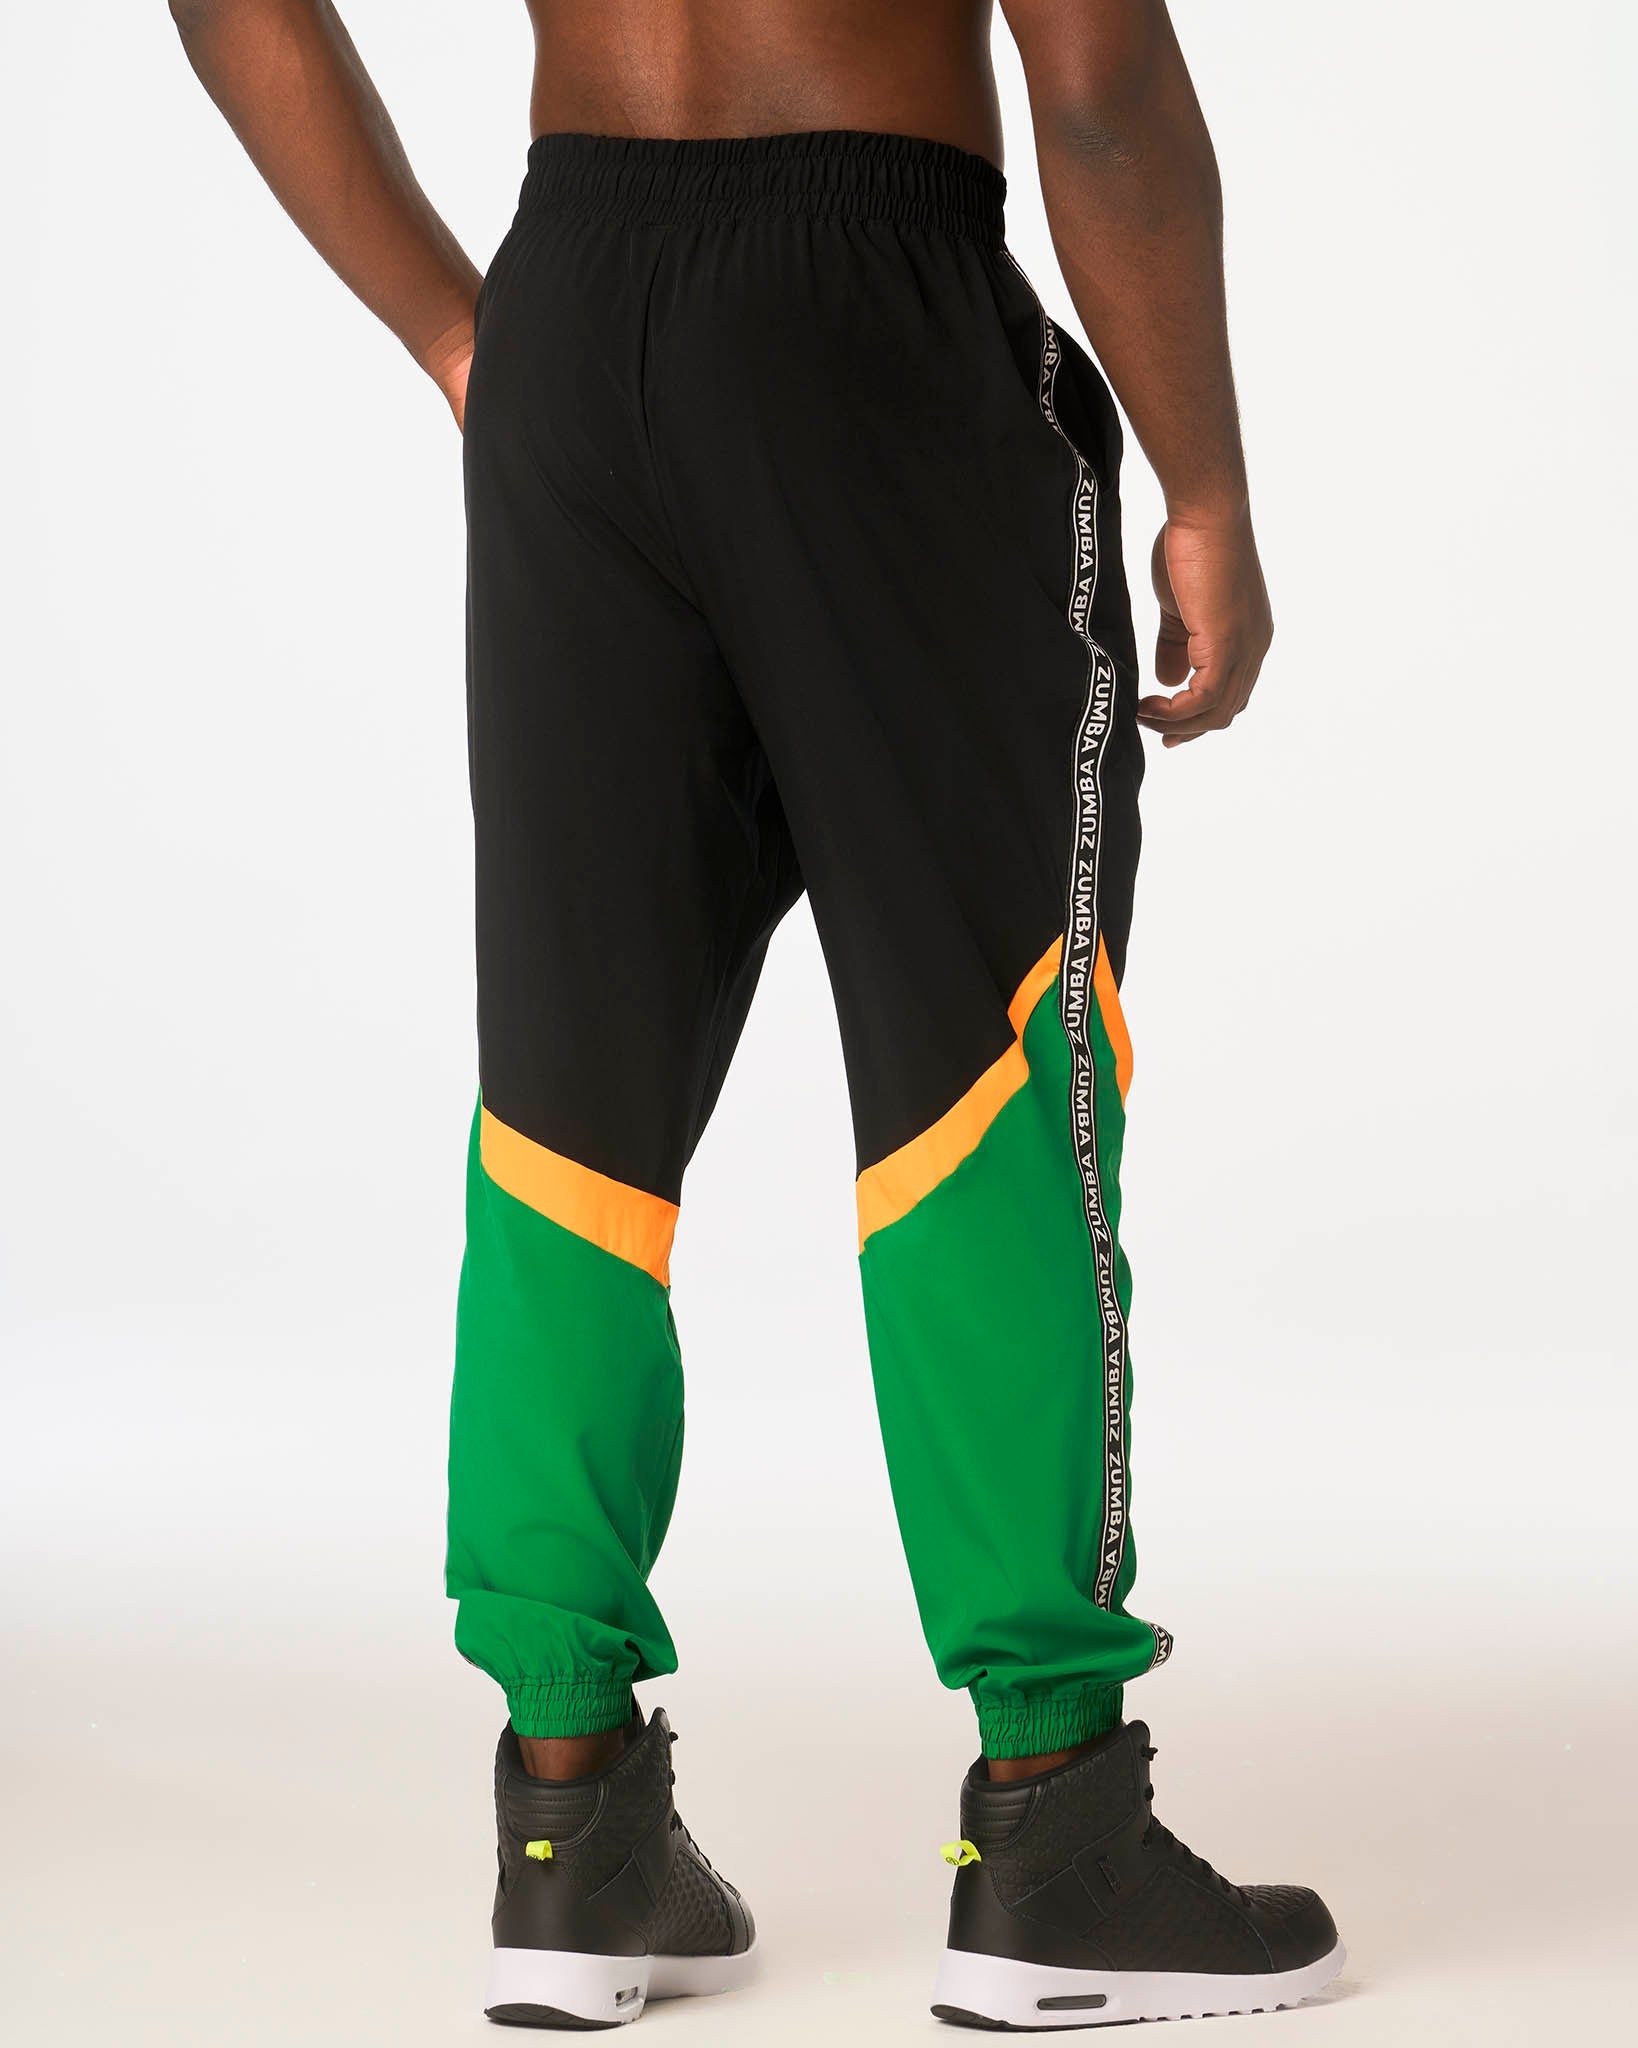 Zumba Palm Party High Waisted Track Pants